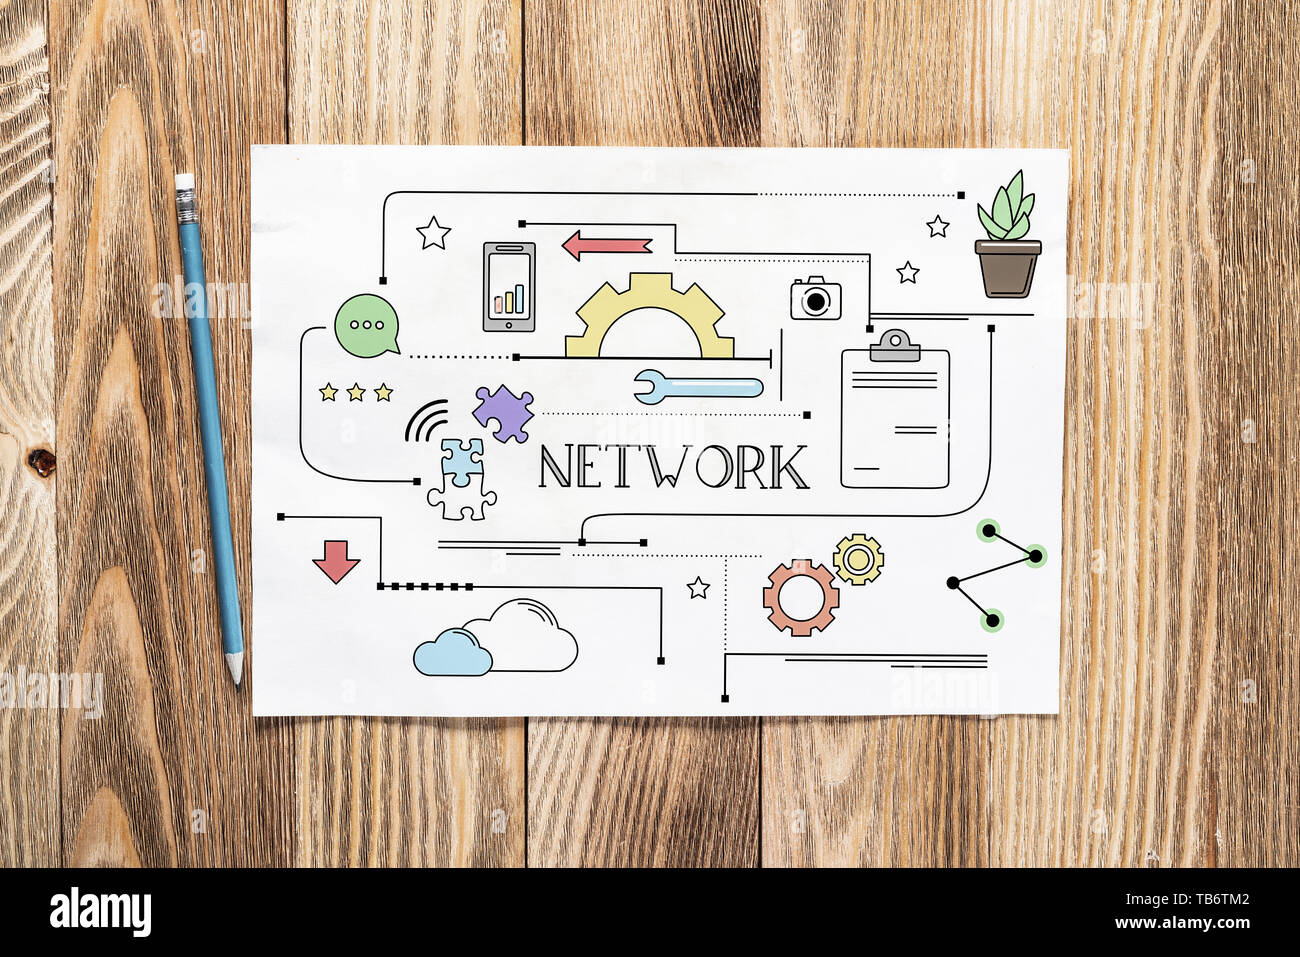 Network connection pencil hand drawn Stock Photo